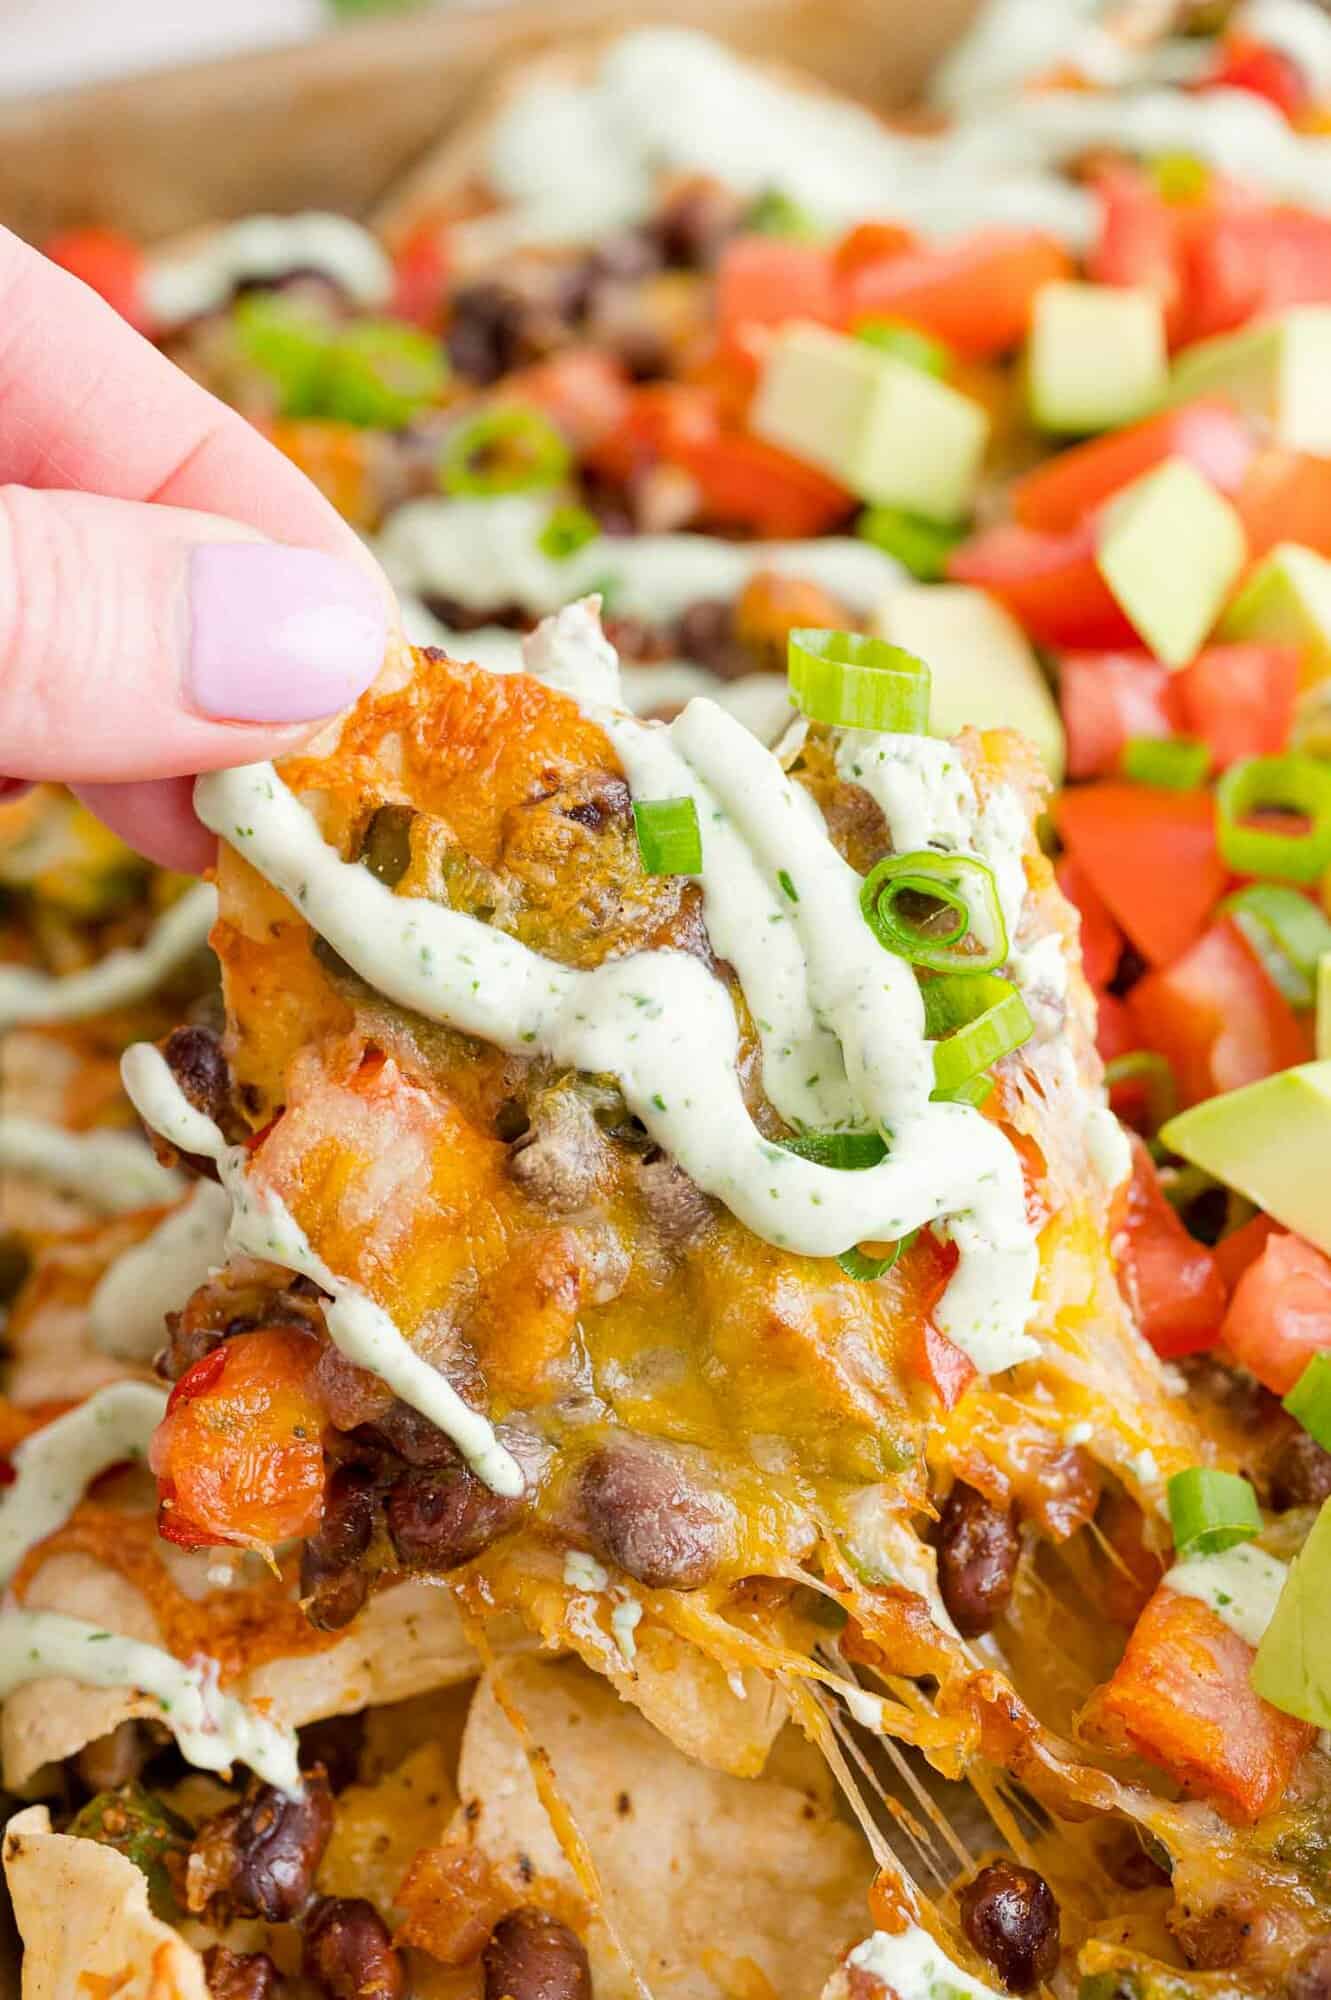 Vegetarian nachos with a drizzle, one being held in a hand.